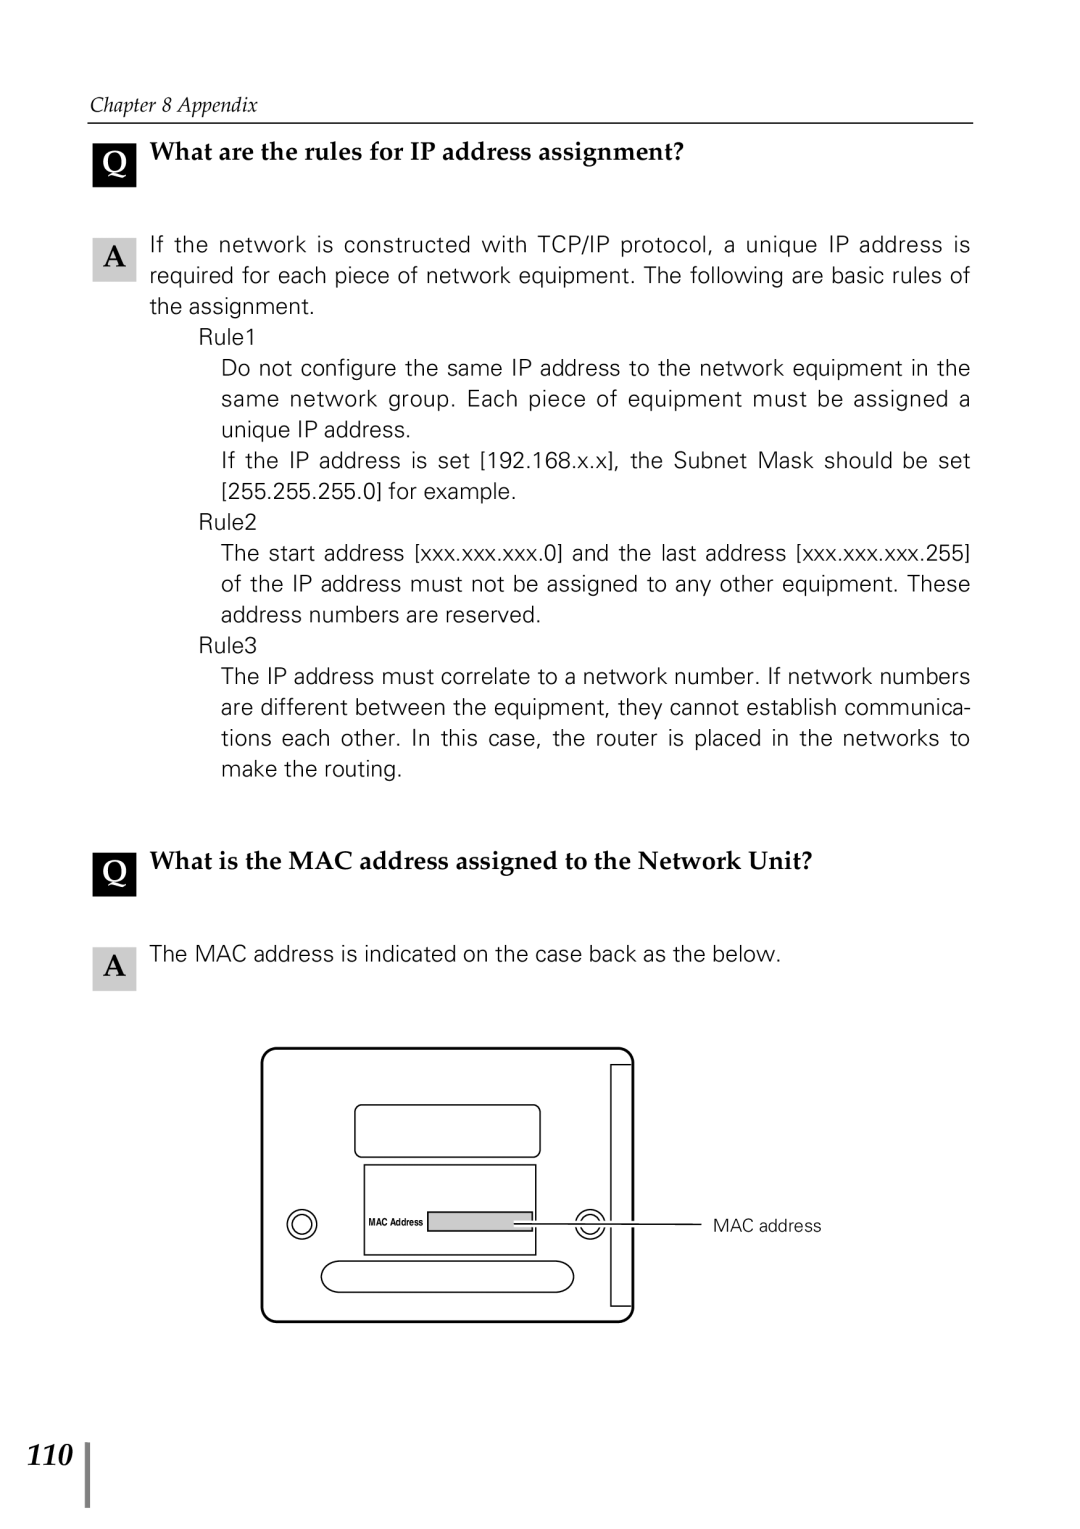 Eiki PjNET-20 Q What are the rules for IP address assignment?, Q What is the MAC address assigned to the Network Unit? 